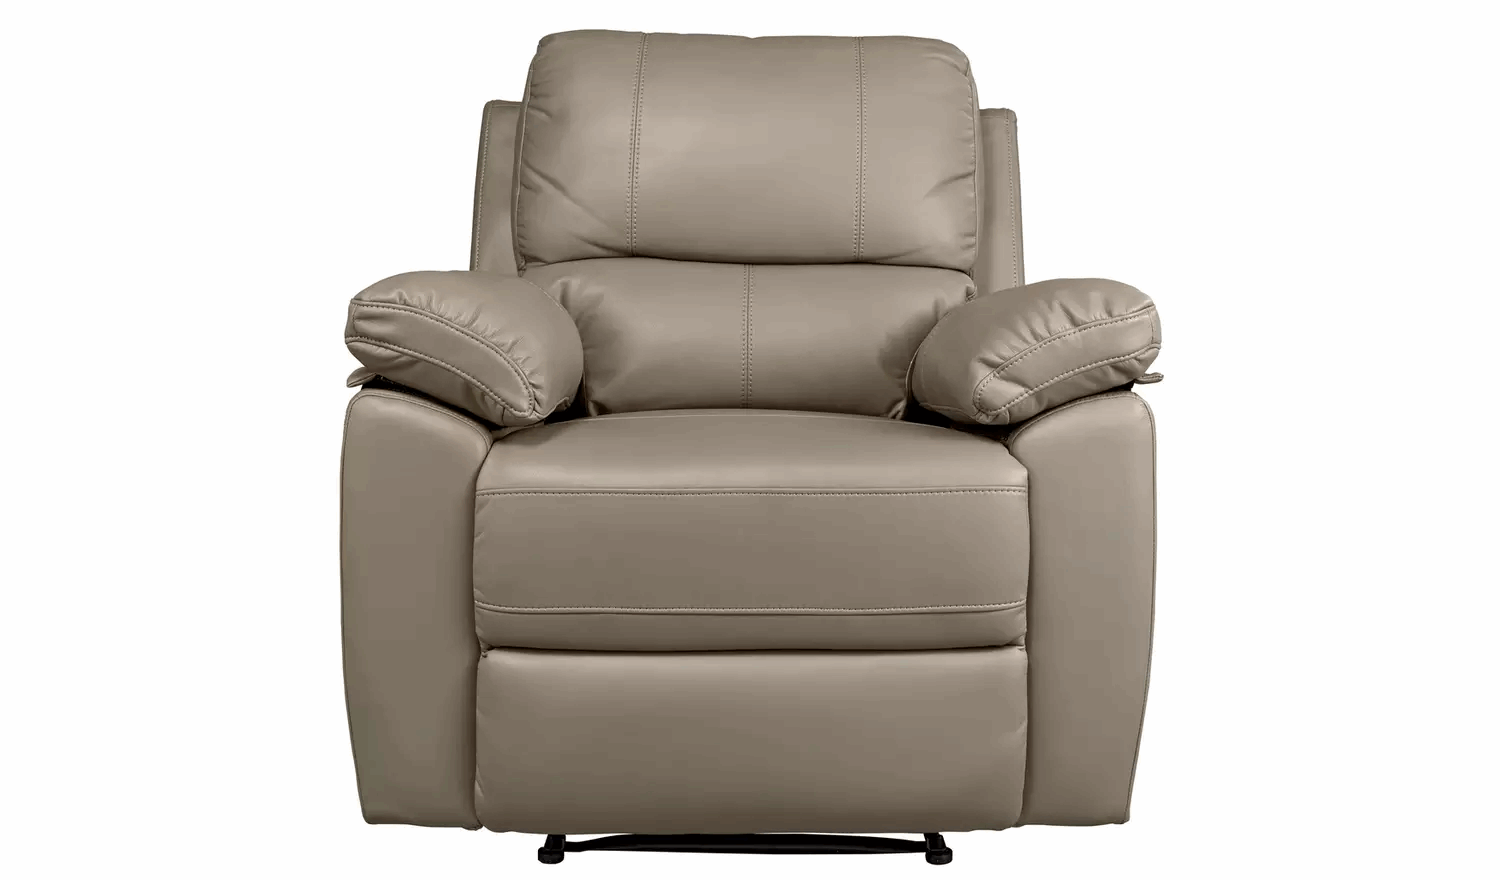 Home Toby Faux Leather Manual Recliner Chair - Grey